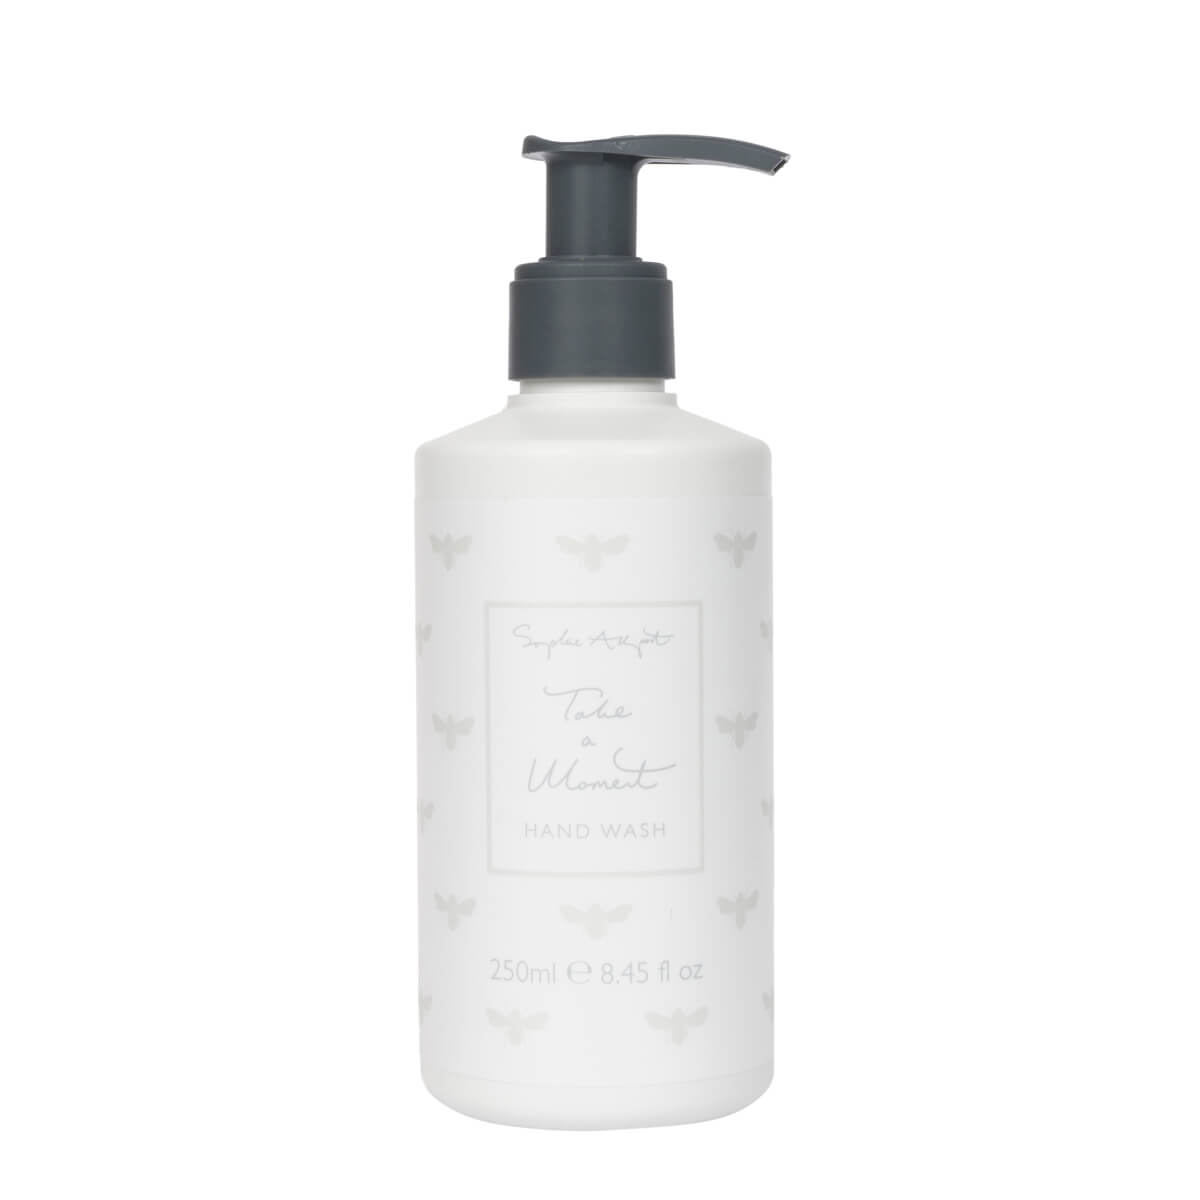 Take a Moment Luxury Hand Wash